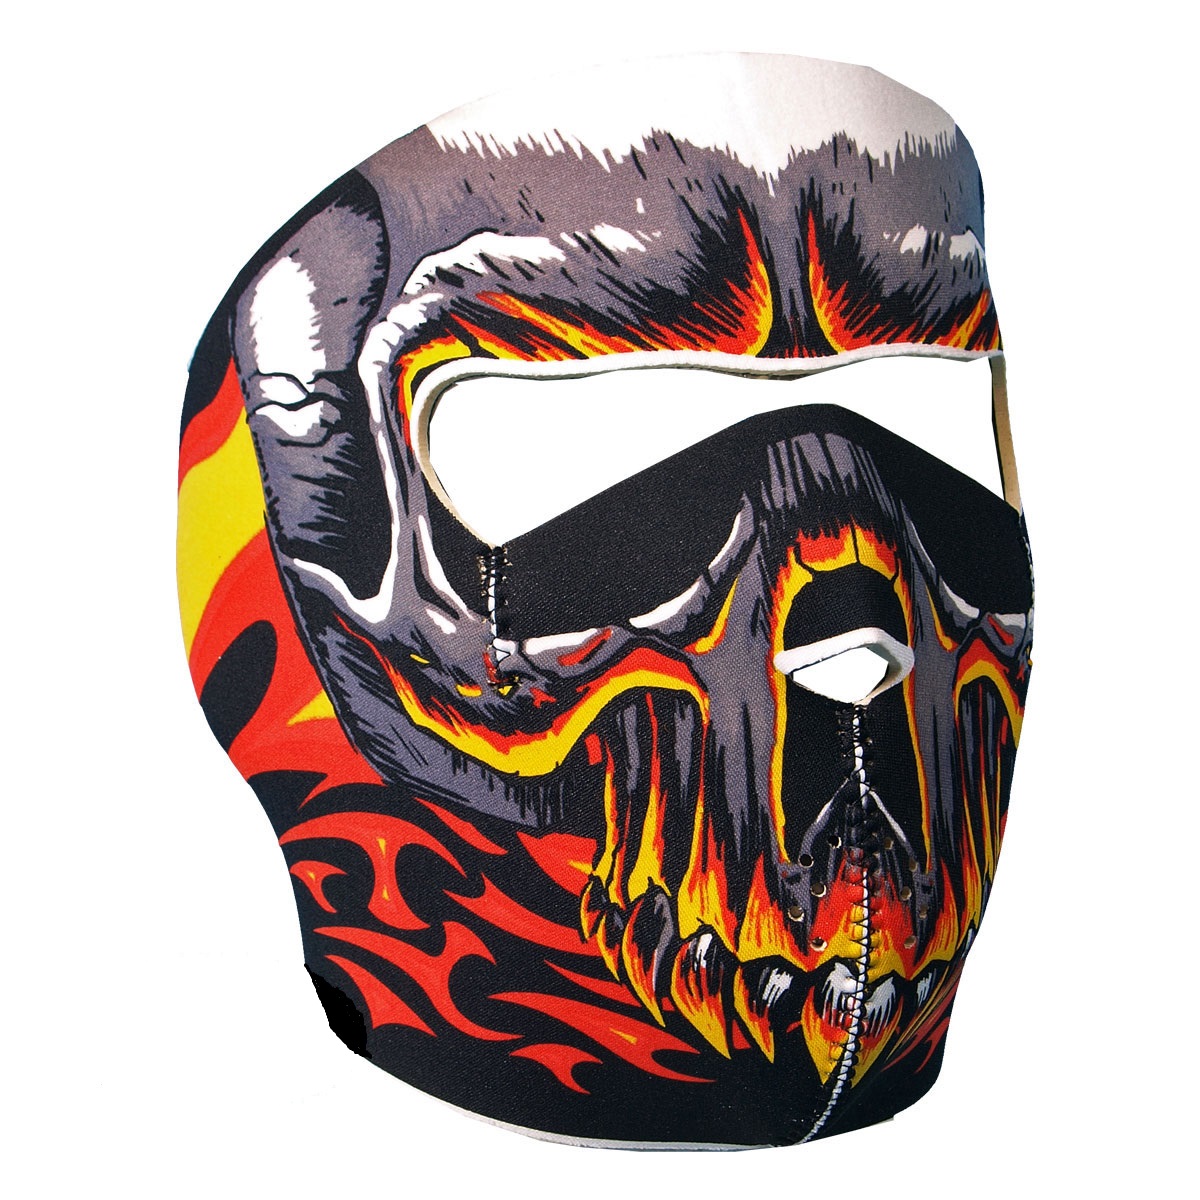 Motorcycle Face Masks : Boots 'n' All Online, T-Shirts, Belt ...